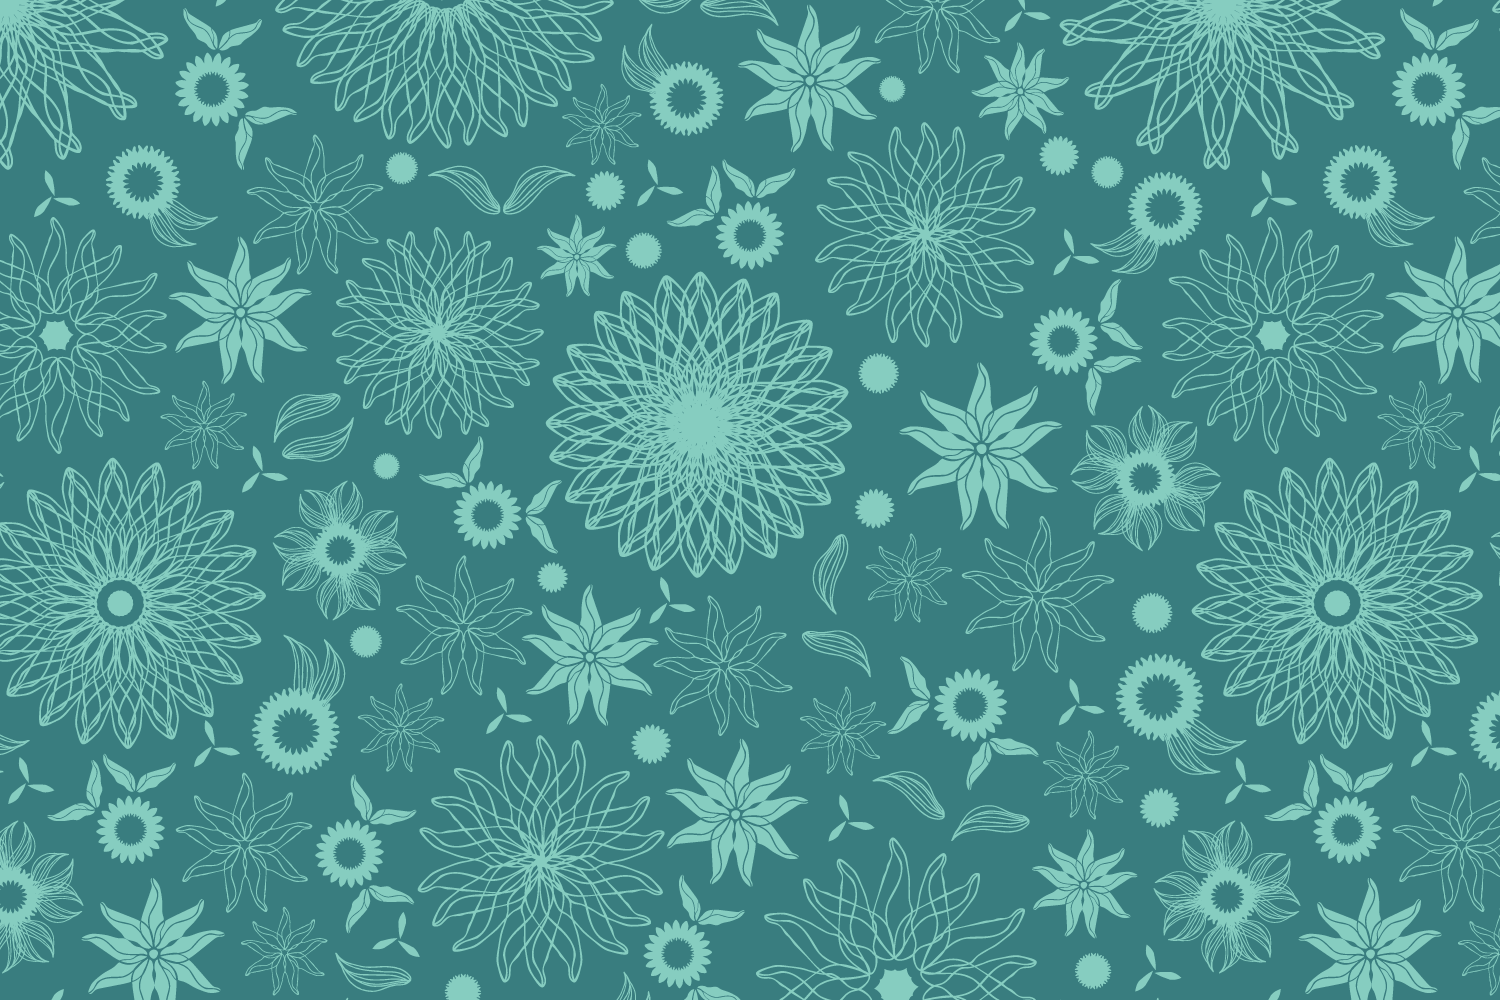 Floral_Variety_1500px_x_1000px-13.png